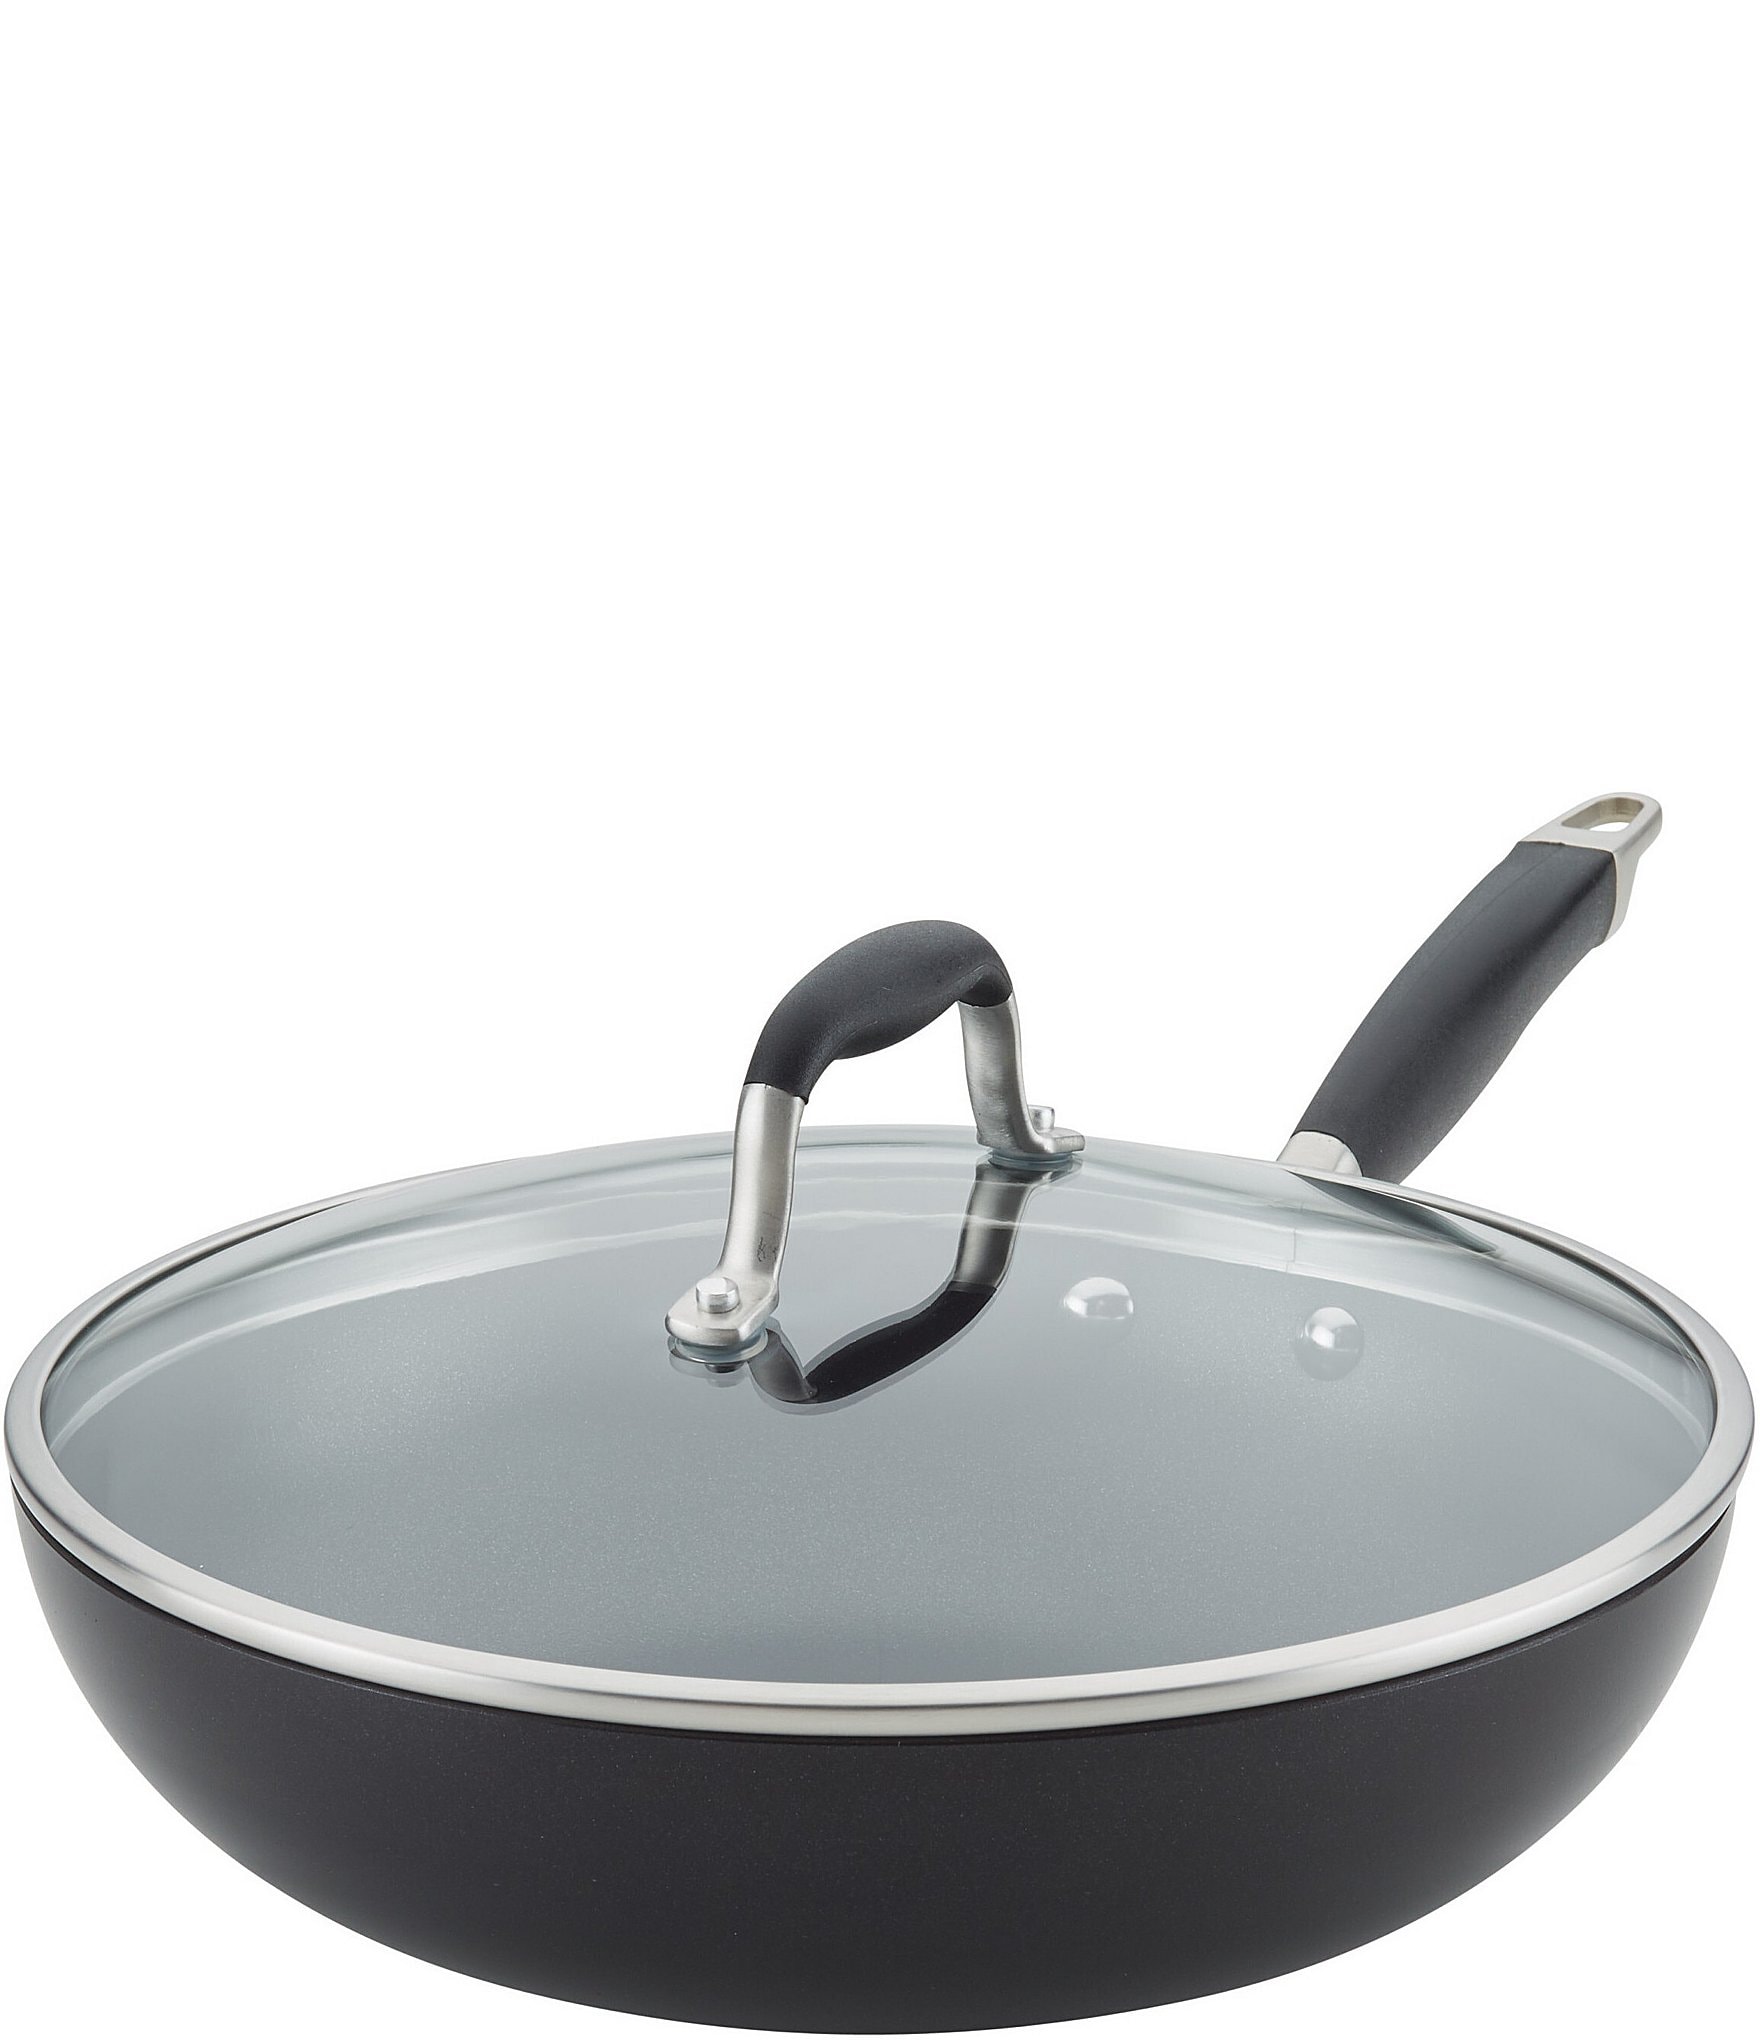 Anolon® Advanced Onyx Hard-Anodized Nonstick Covered Ultimate Pan ...